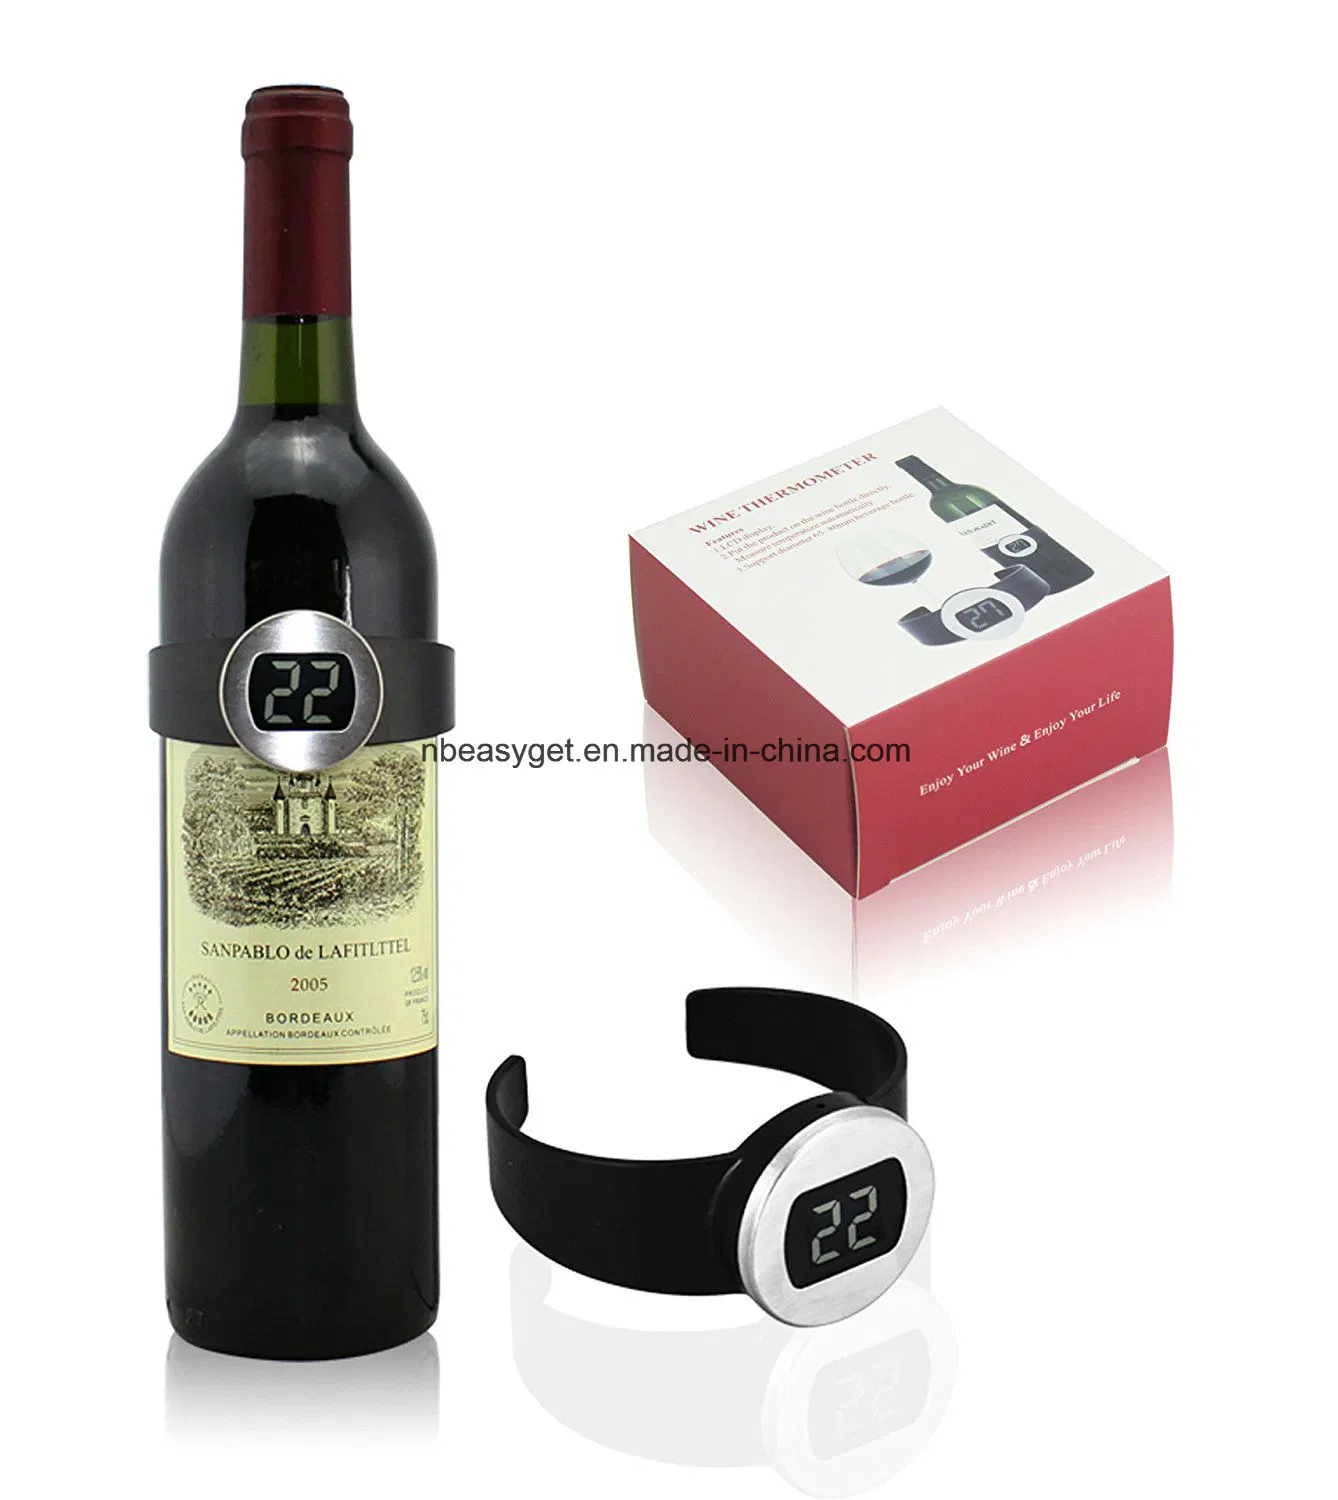 Champagne and Wine Bottle Snap Thermometer Digital Instant Read Thermometers with LED Display for Wine Enthusiast Red Wine Bracelet Thermometer Esg10124